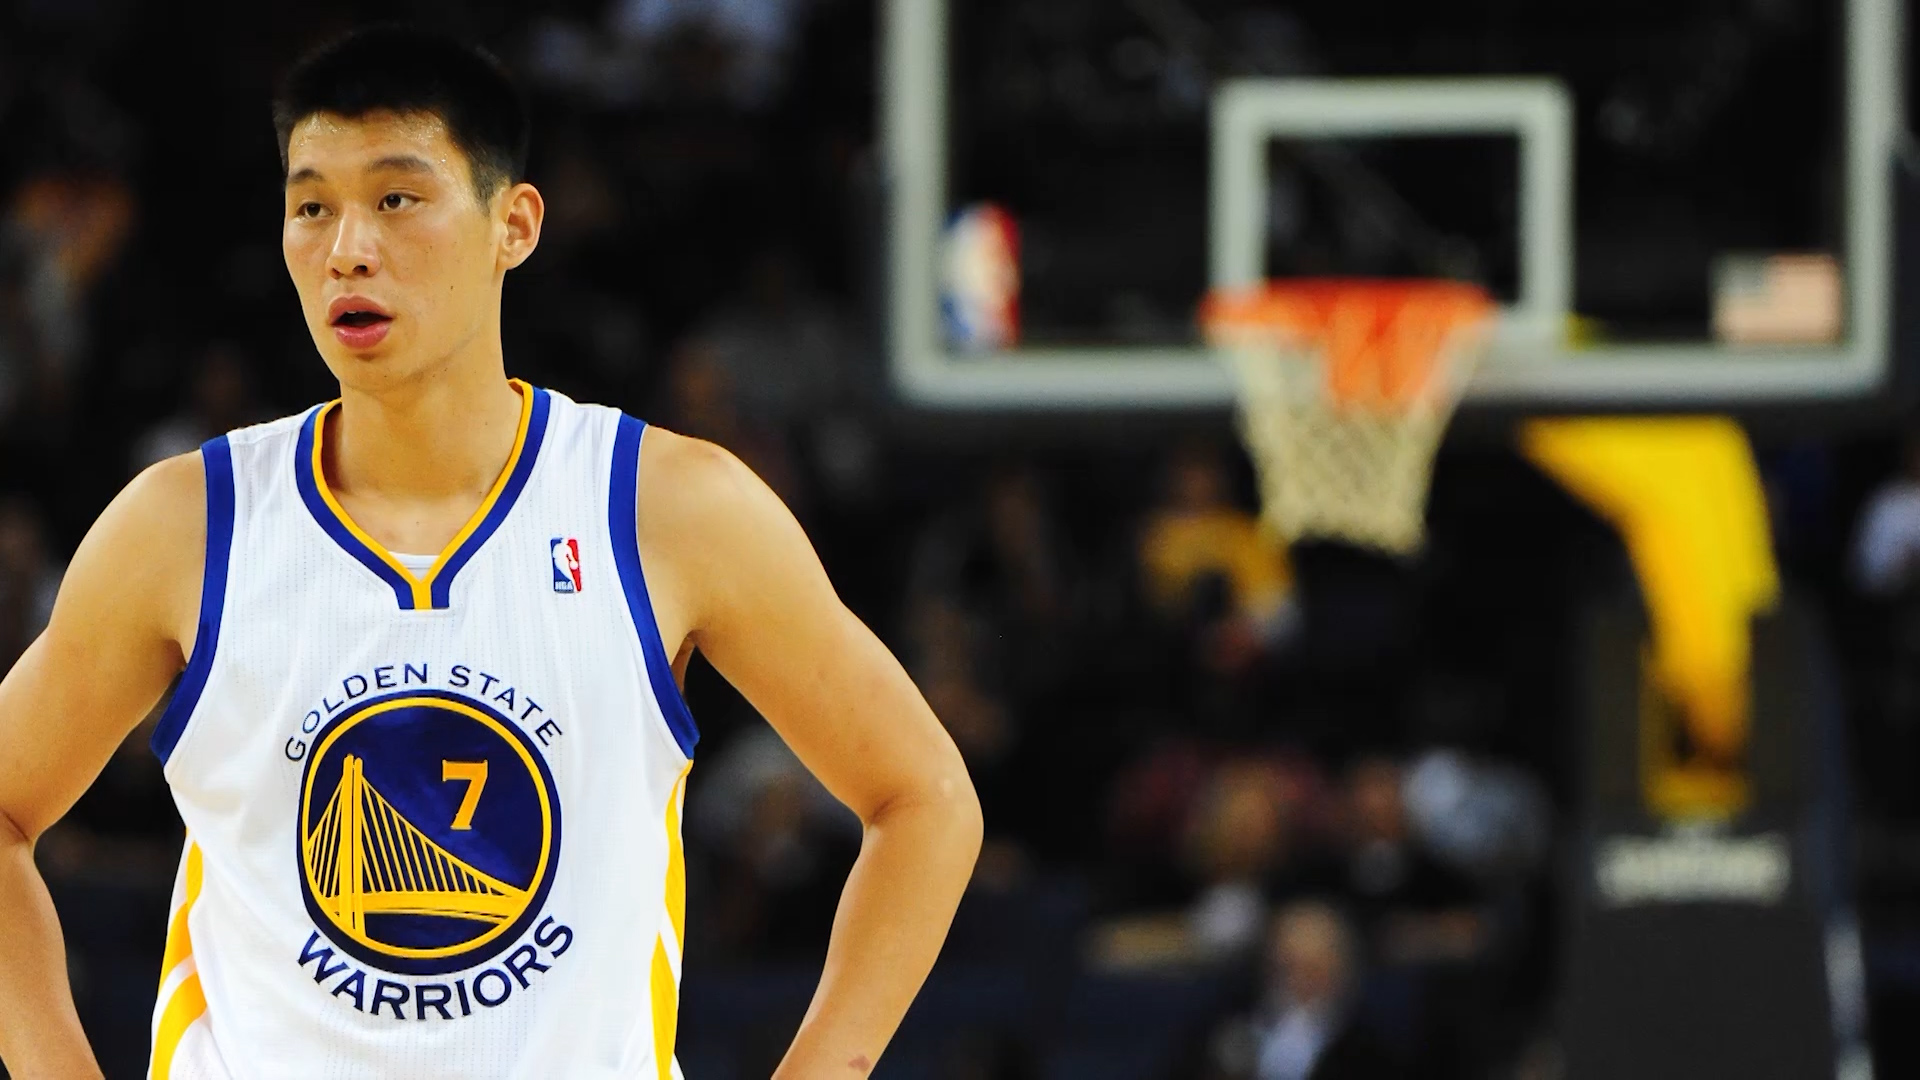 Jeremy Lin: The Highs and Lows of His NBA Journey